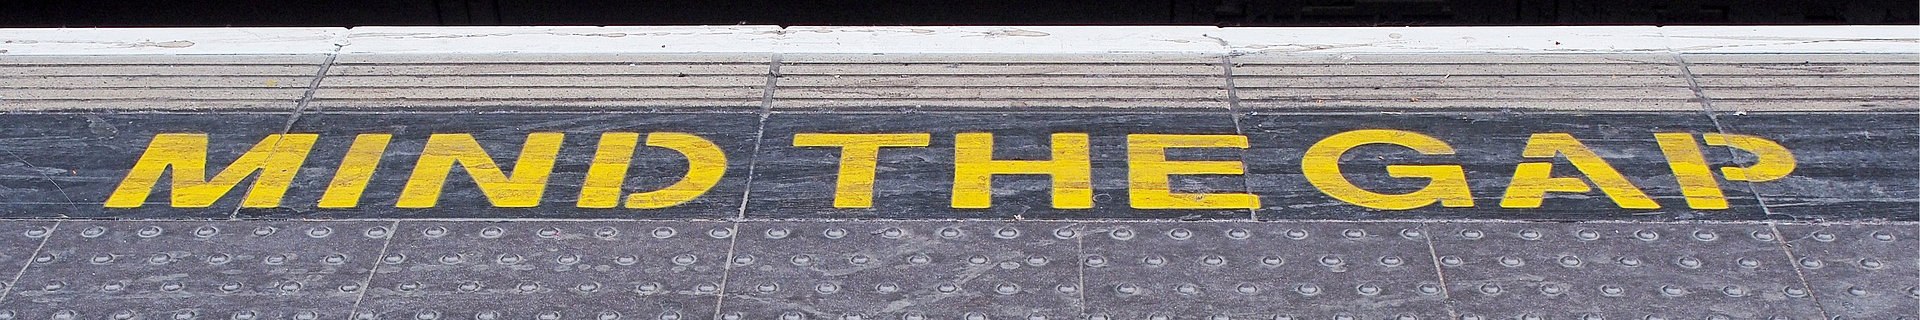 Mind the gap: painted on the floor at an underground station